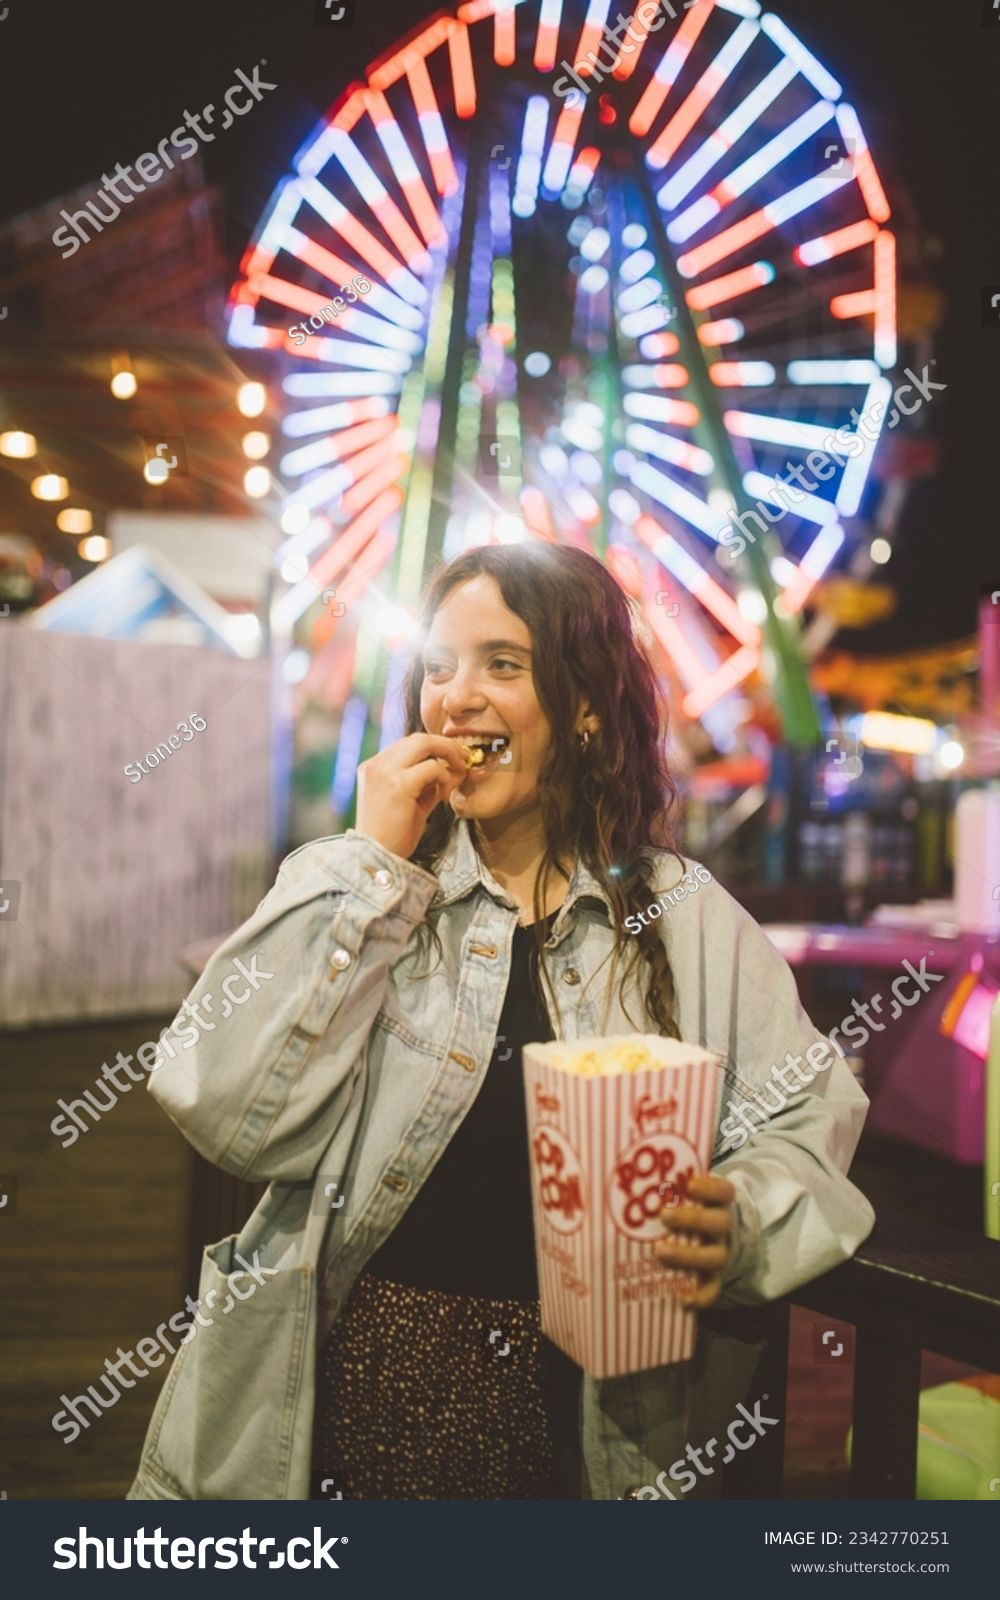 A young lady in a good mood with a popcorn cup in the night at luna park in Santa Monica in front of unfocused illuminations of a Ferris wheel. Santa Monica. California. #2342770251